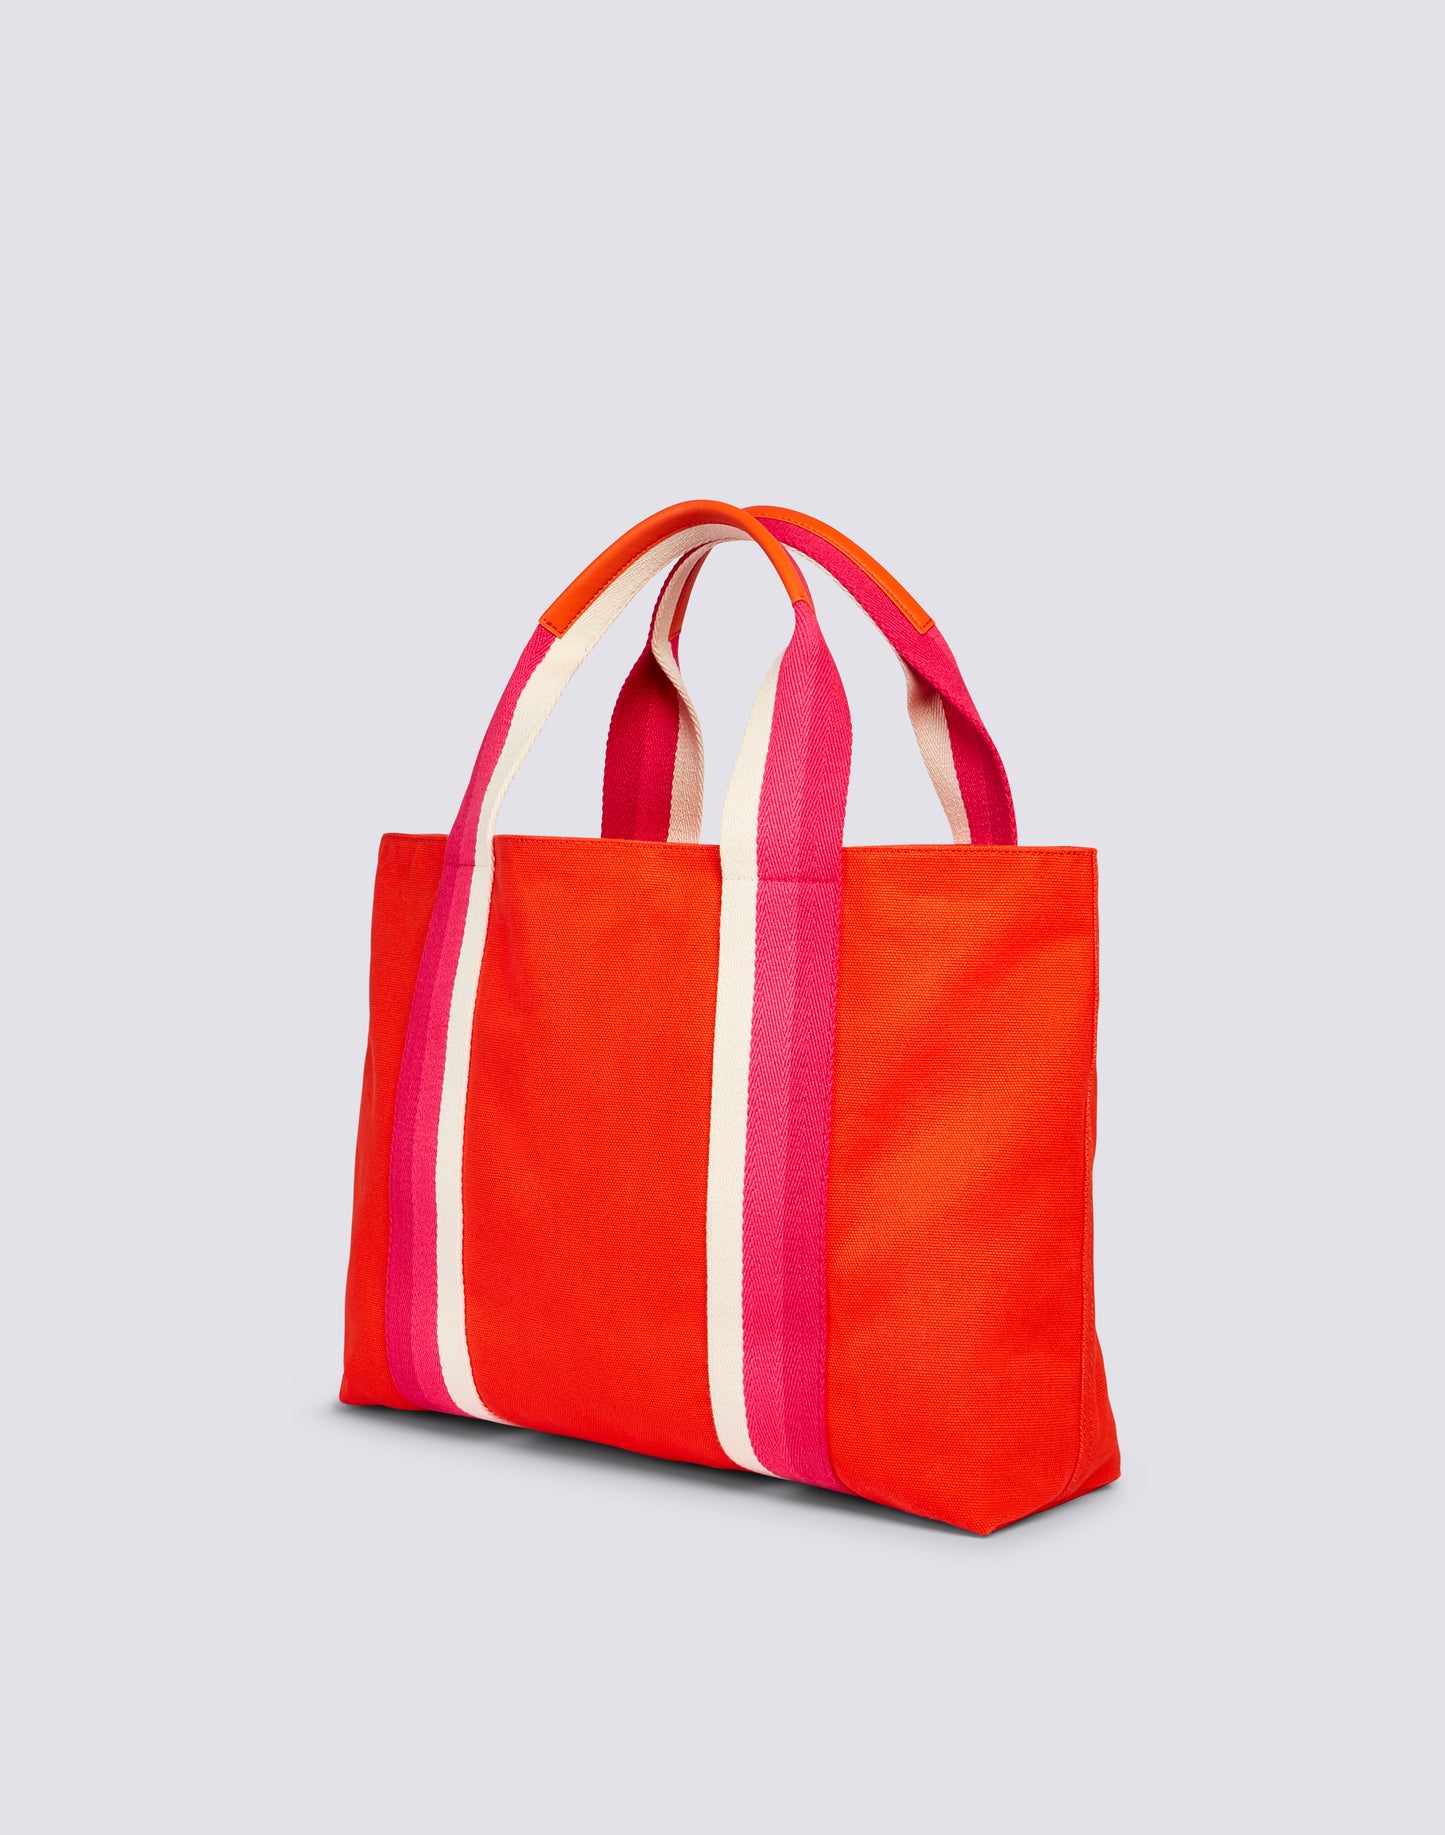 EGLE - SHOPPING BAG WITH RAINBOW DETAILS